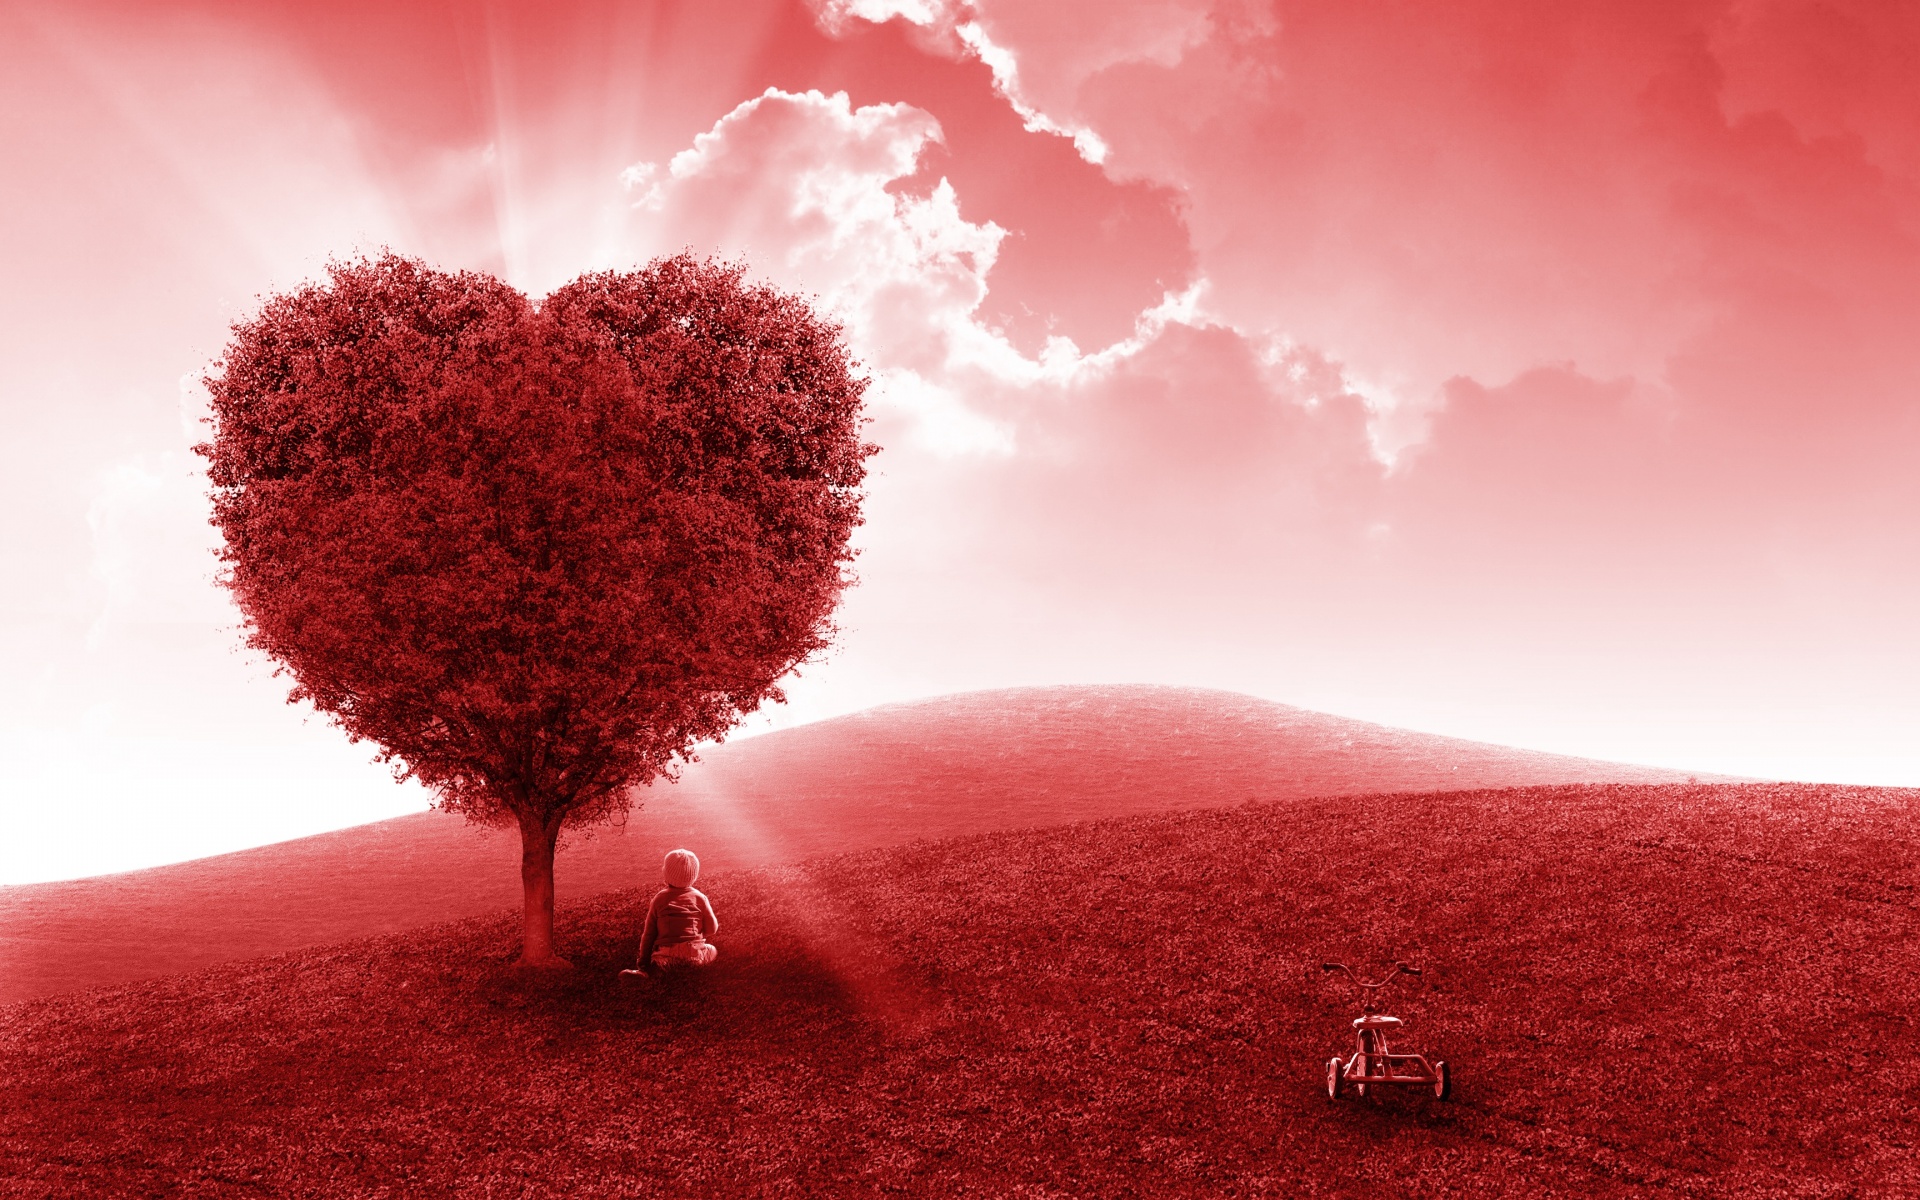 Download A Red Heart Shaped Tree In A Field Wallpaper | Wallpapers.com